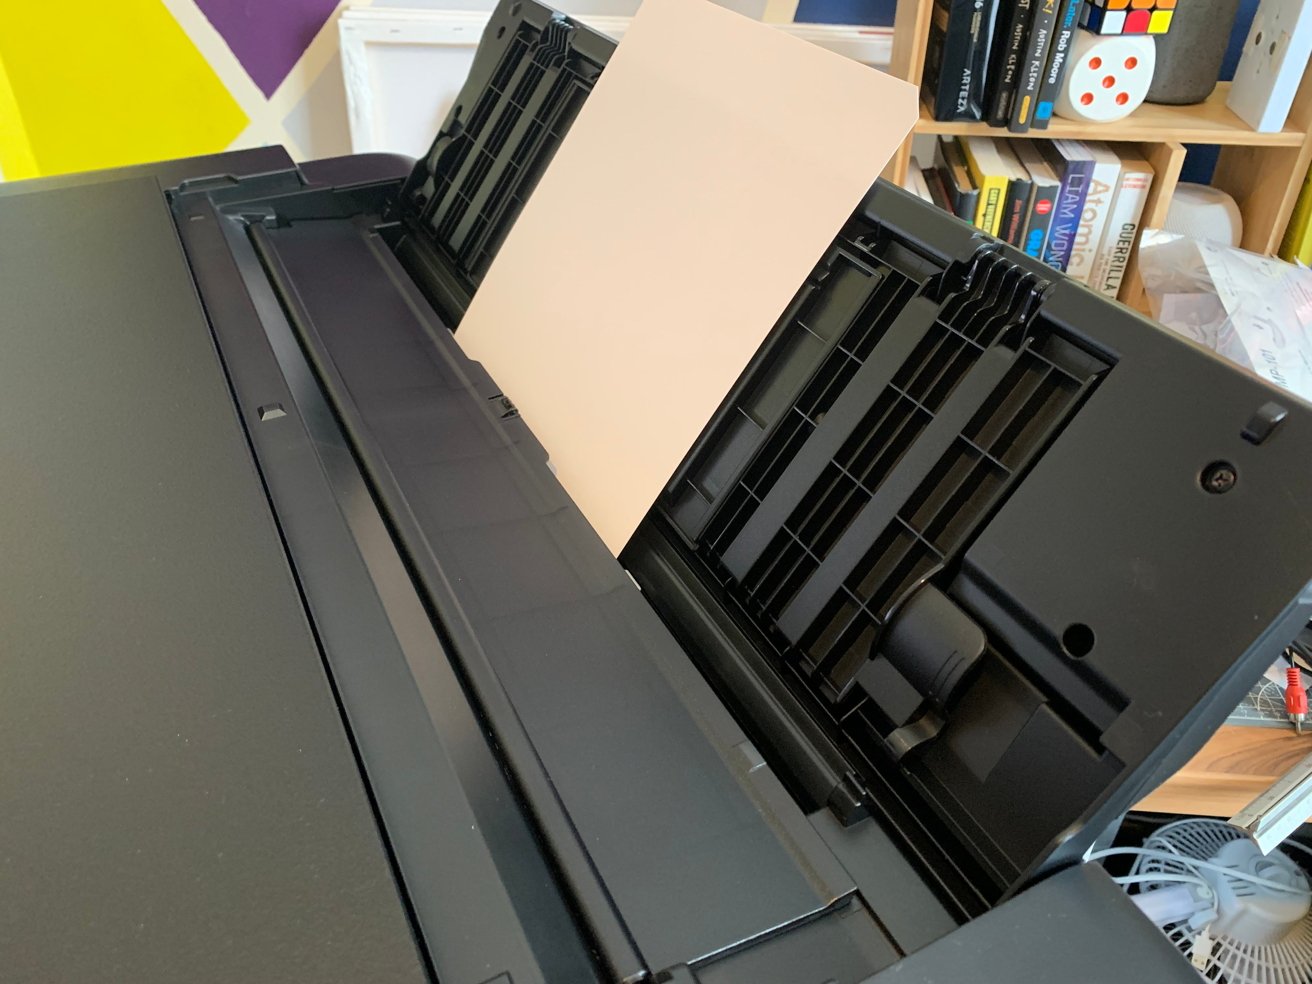 This printer is big and heavy, and can handle far more than typical A4 paper (A4 for scale)